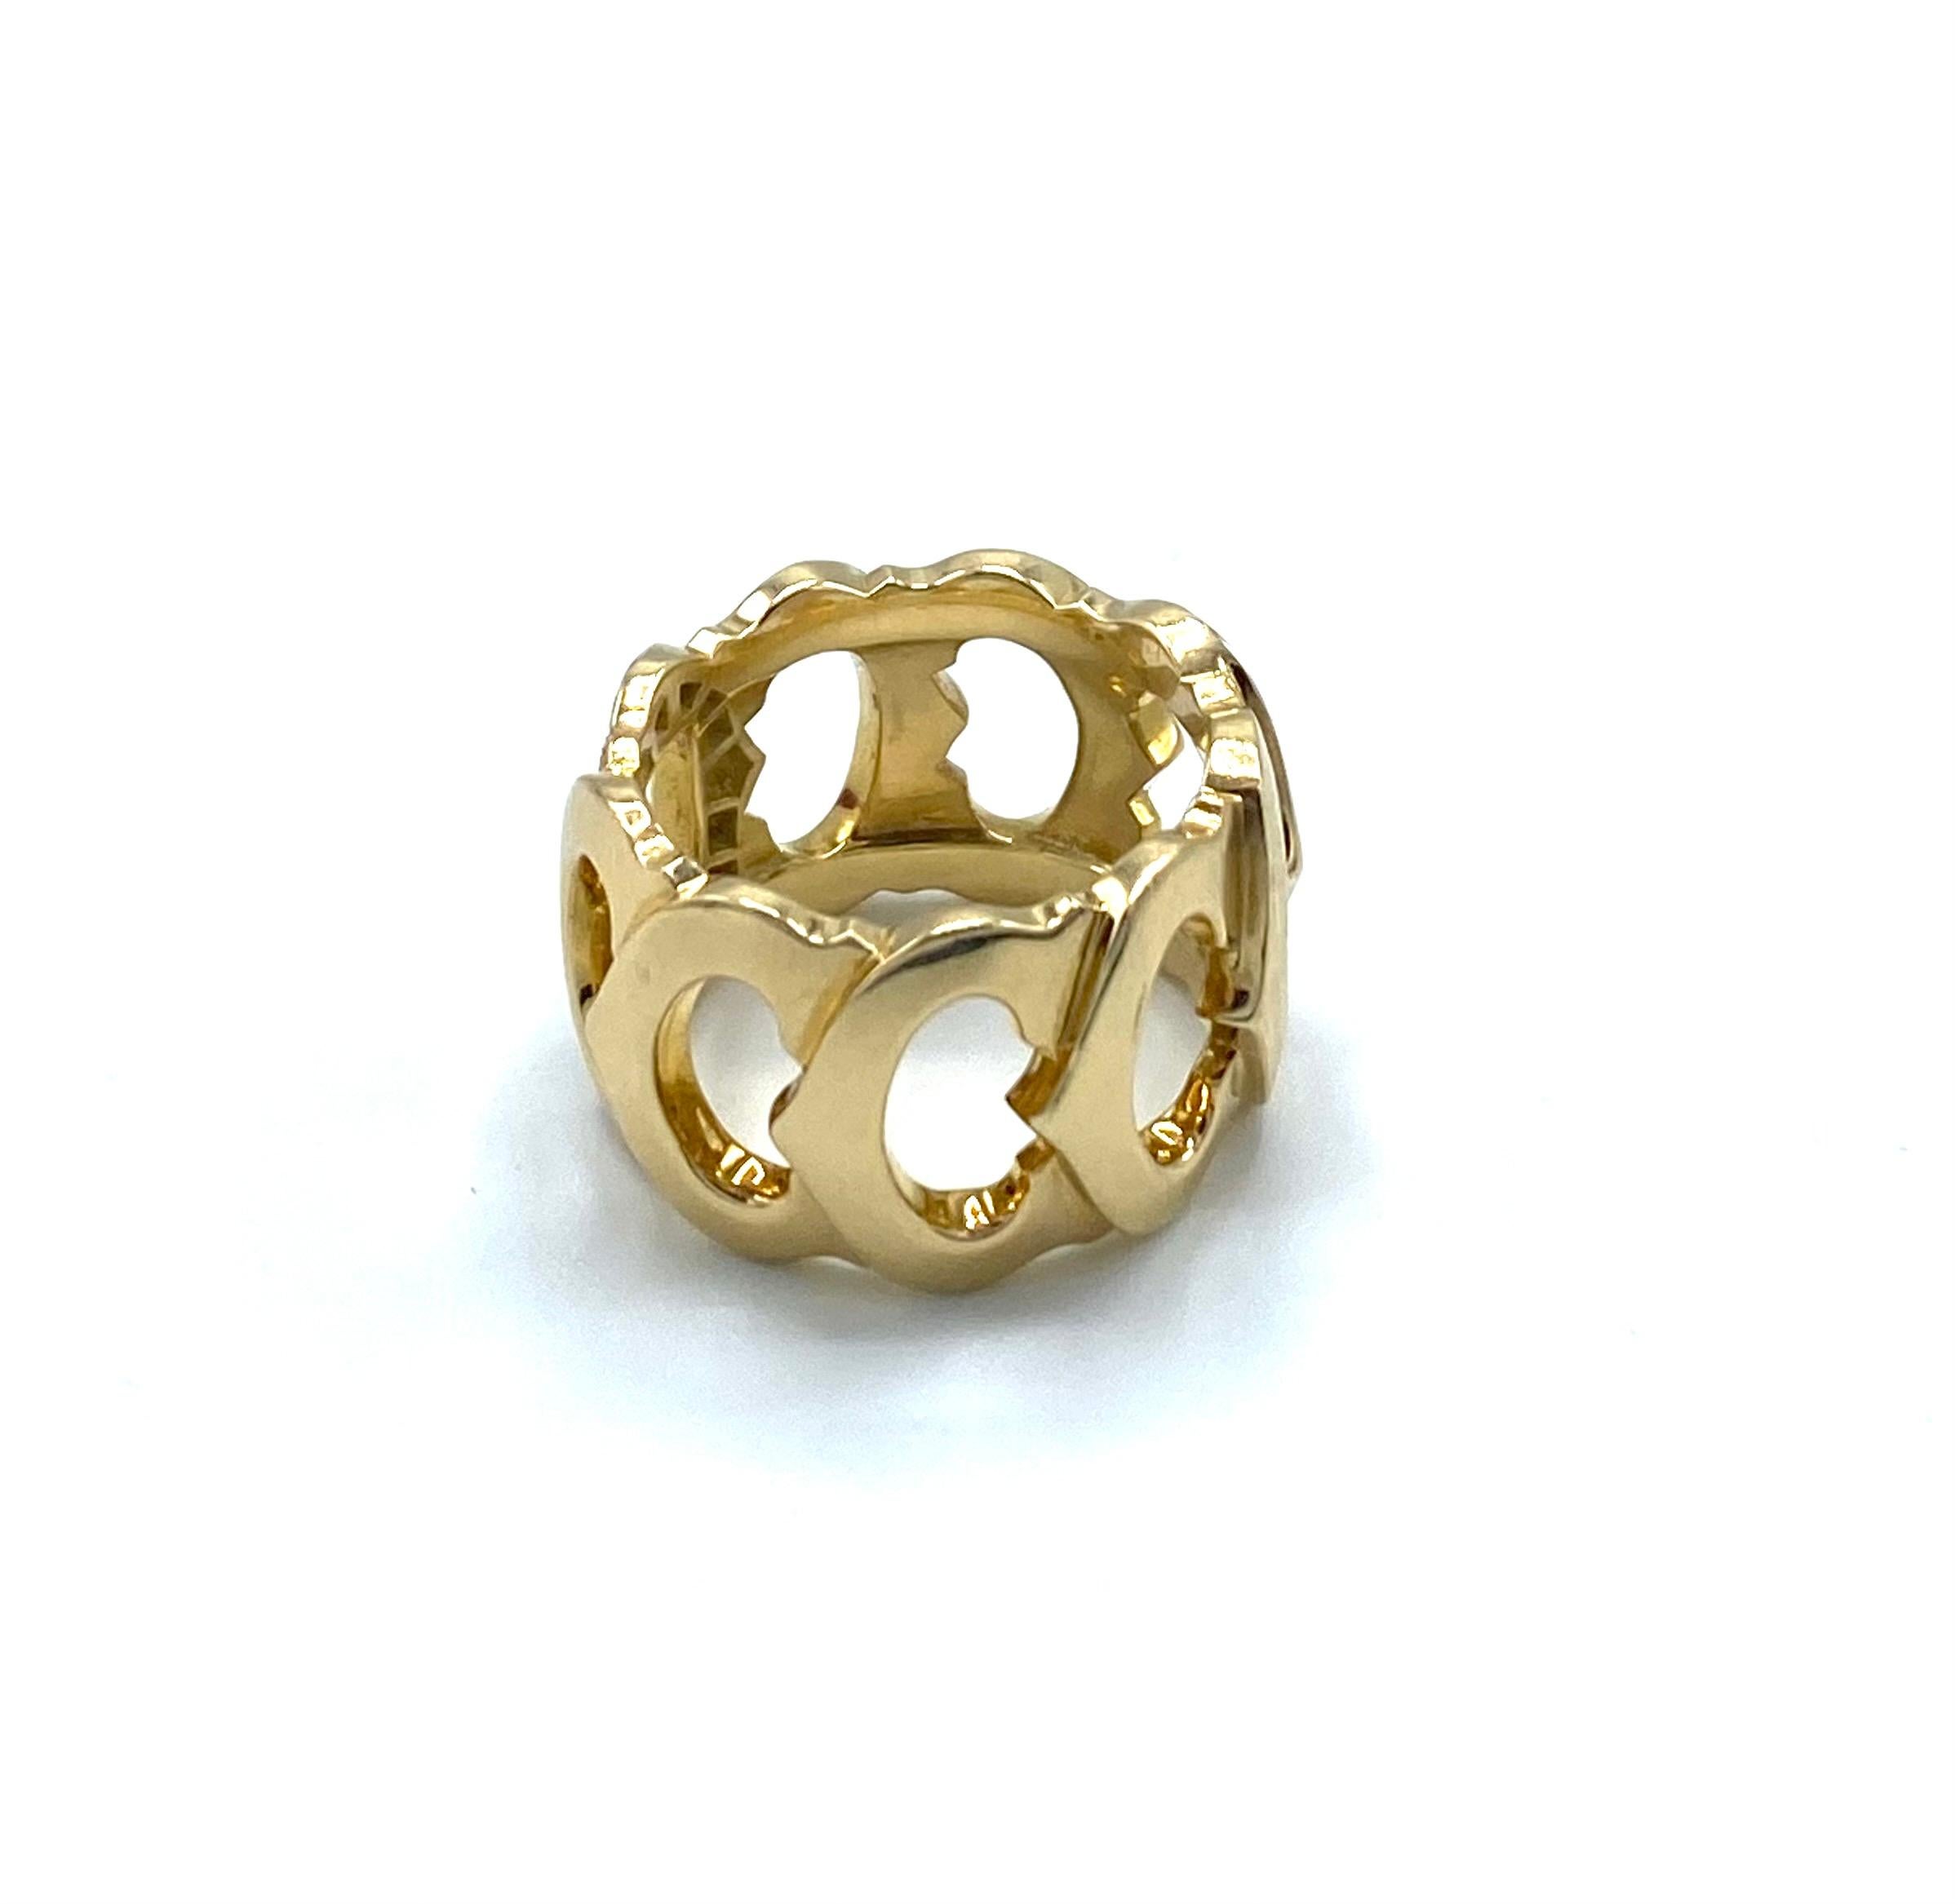 Product details:

The ring is designed by Cartier, it is made out of 18 karat yellow gold and approximately 0.33 cts. of round brilliant cut diamond E/F - VVS. It features C pattern design. The ring comes with the original vintage Cartier